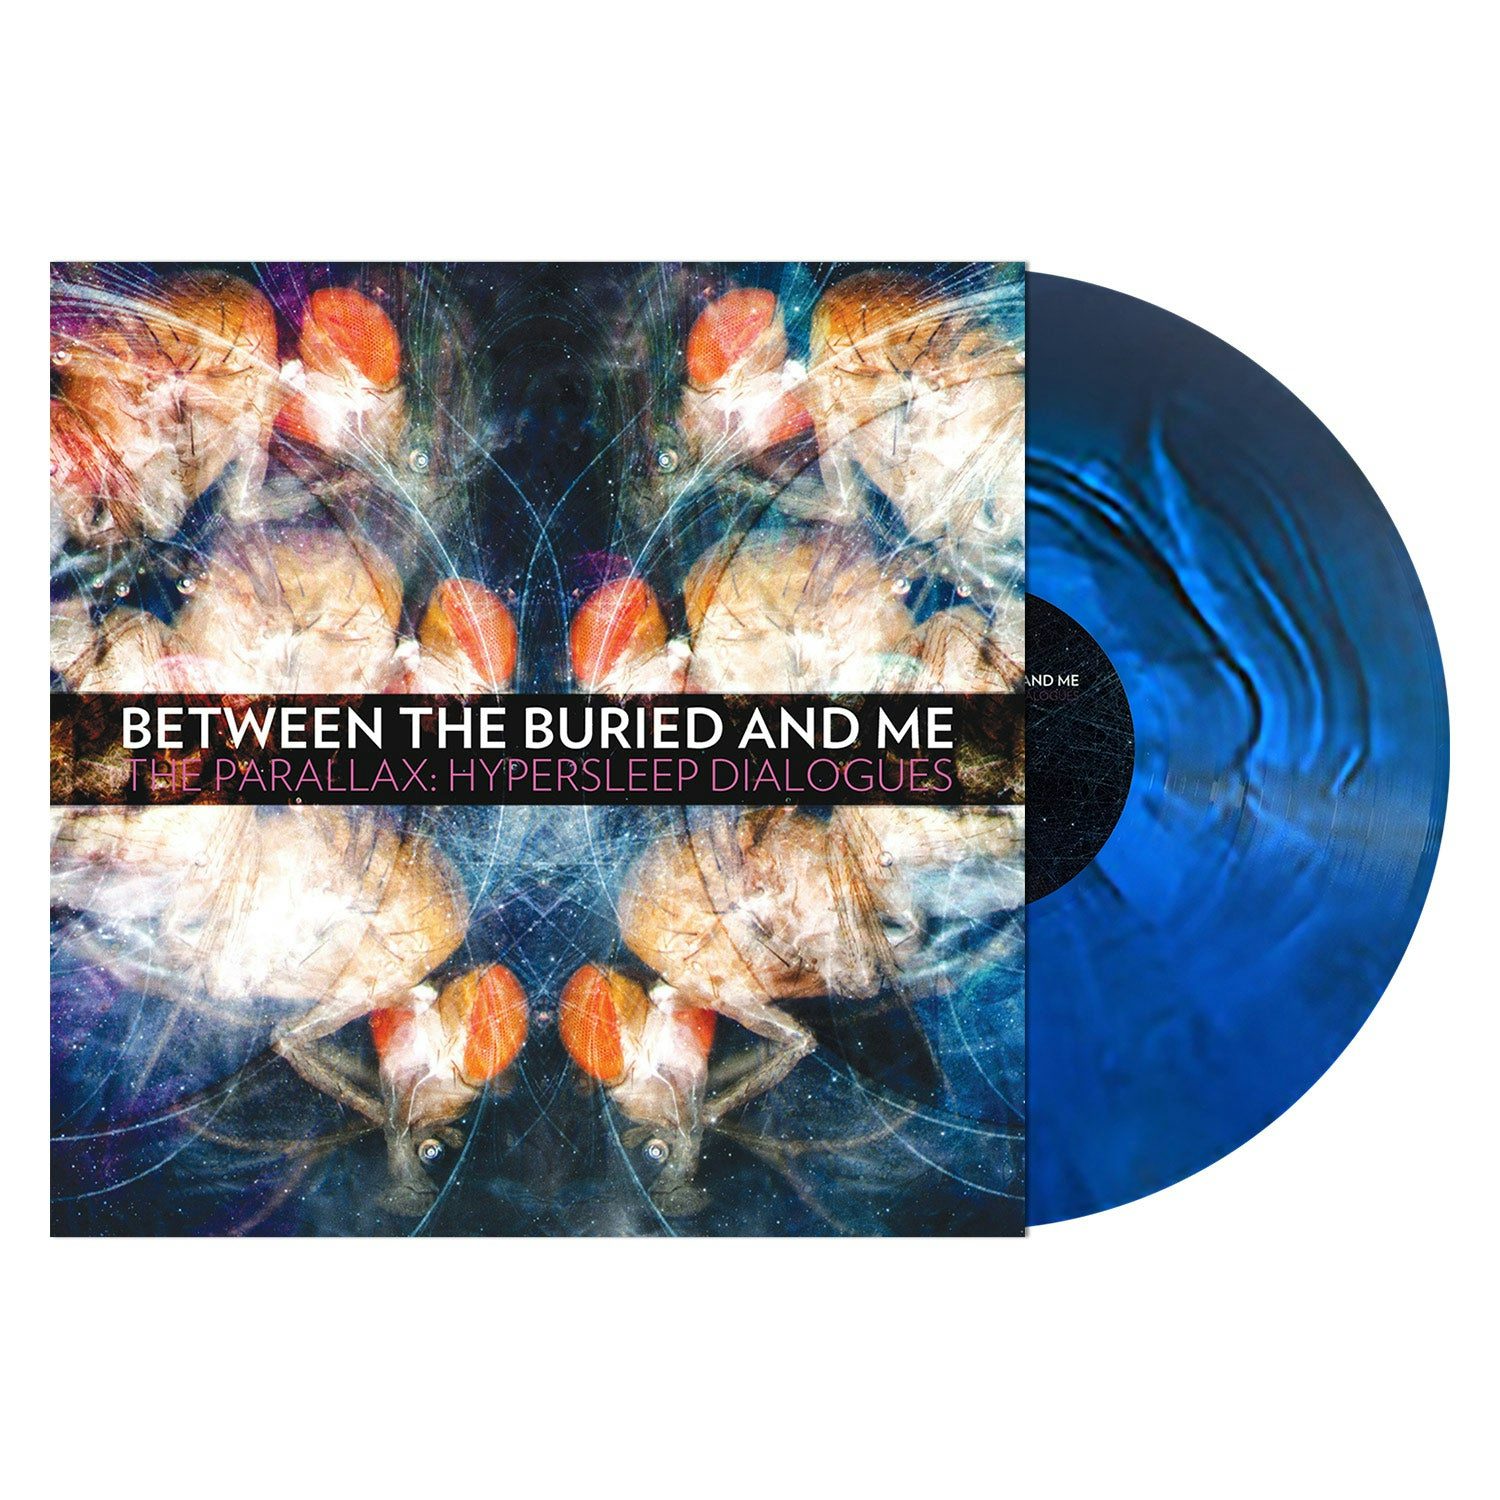 Between The Buried And Me Shirts, Between The Buried And Me Merch